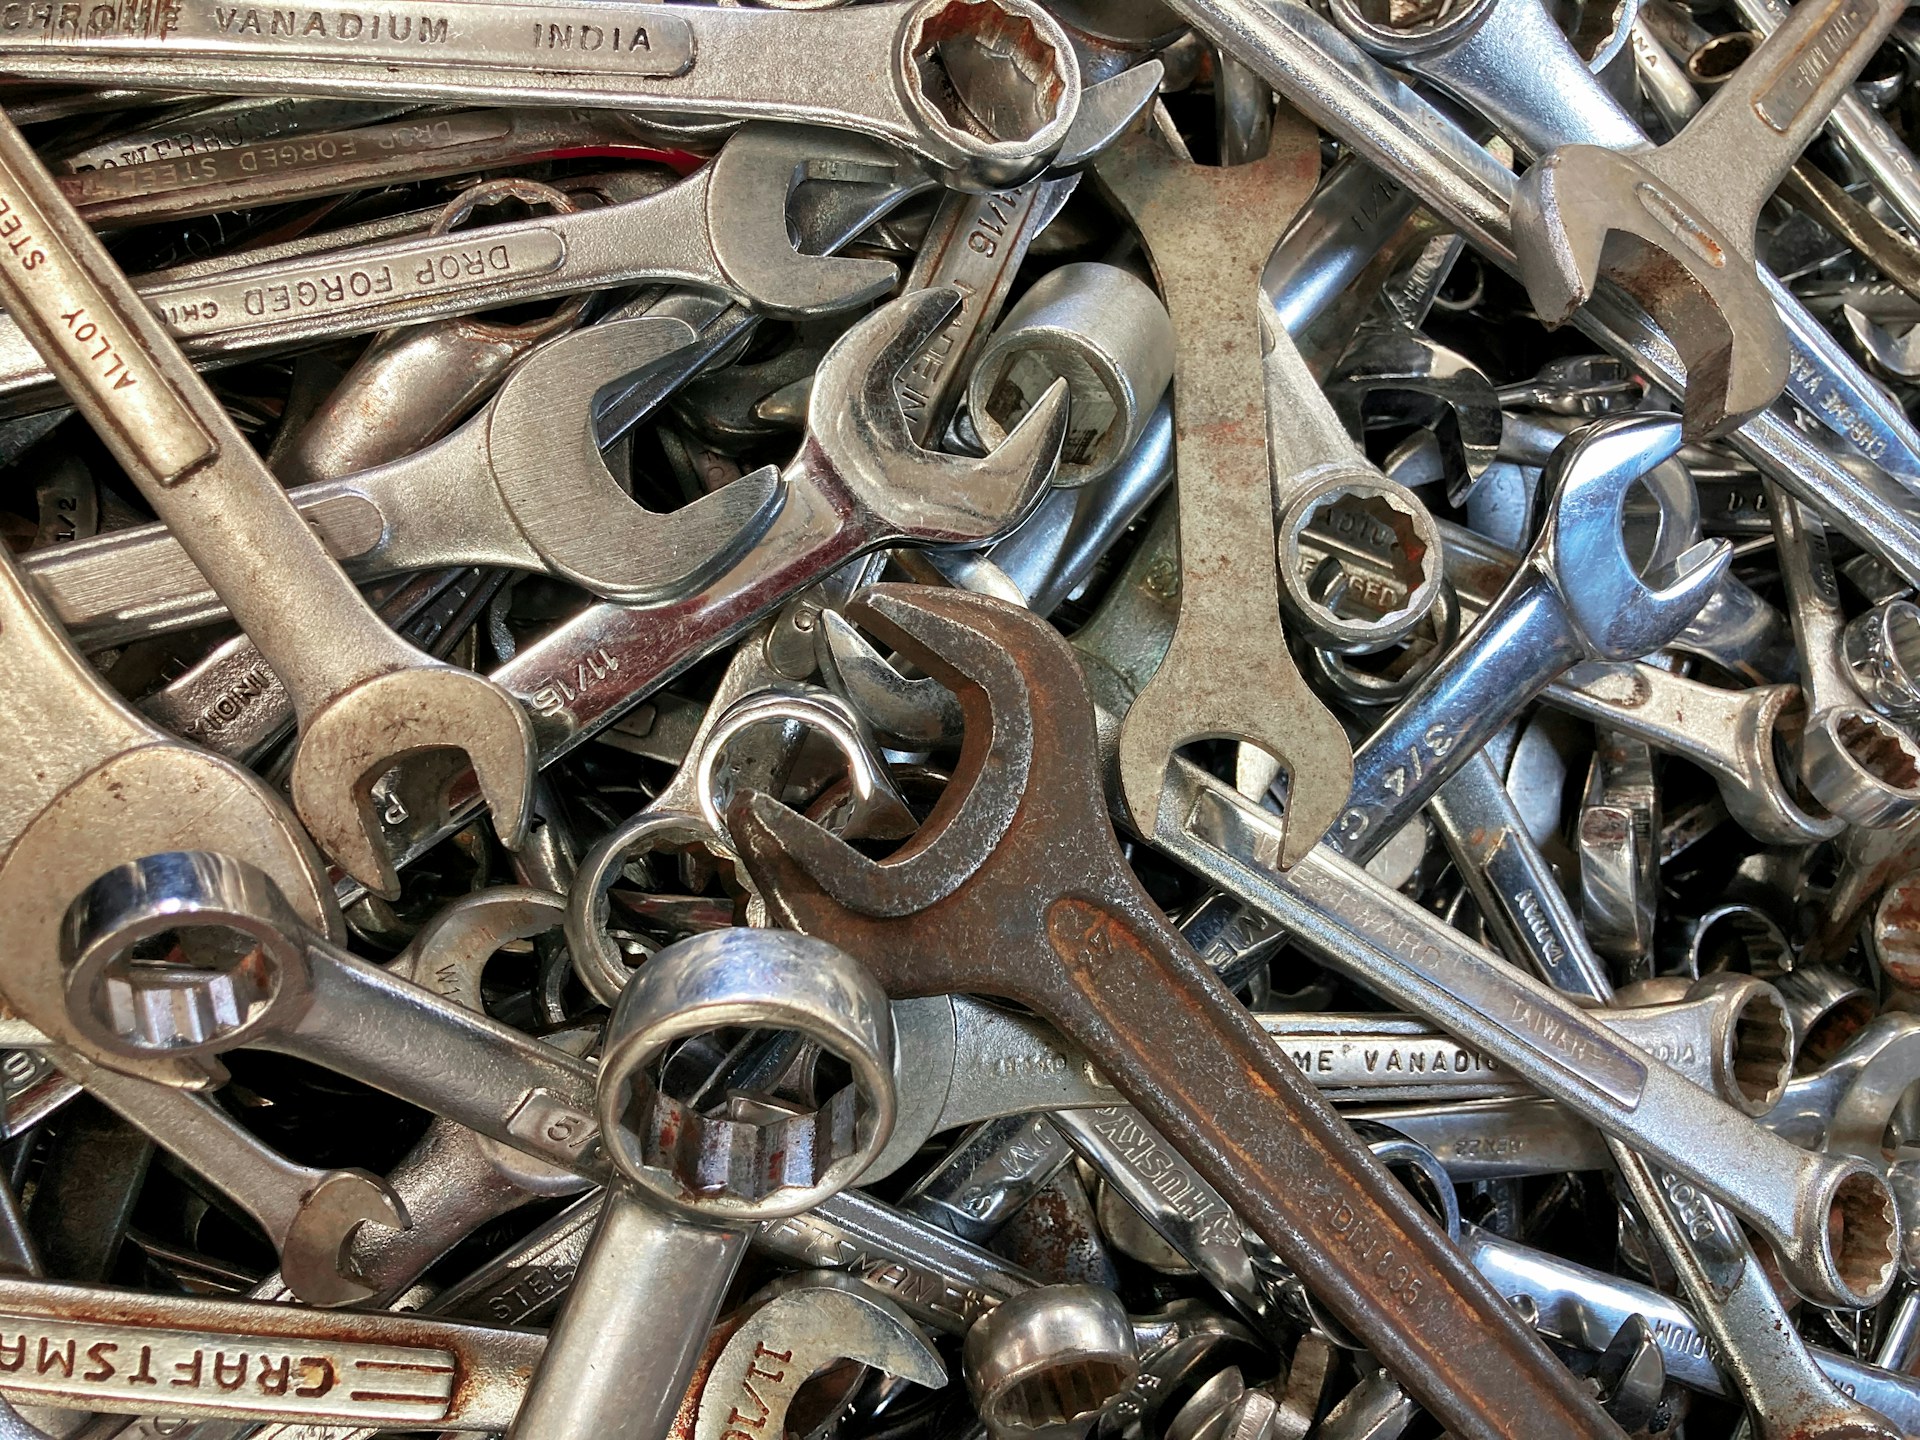 assorted wrenches - needed for working in a ship's plumber job